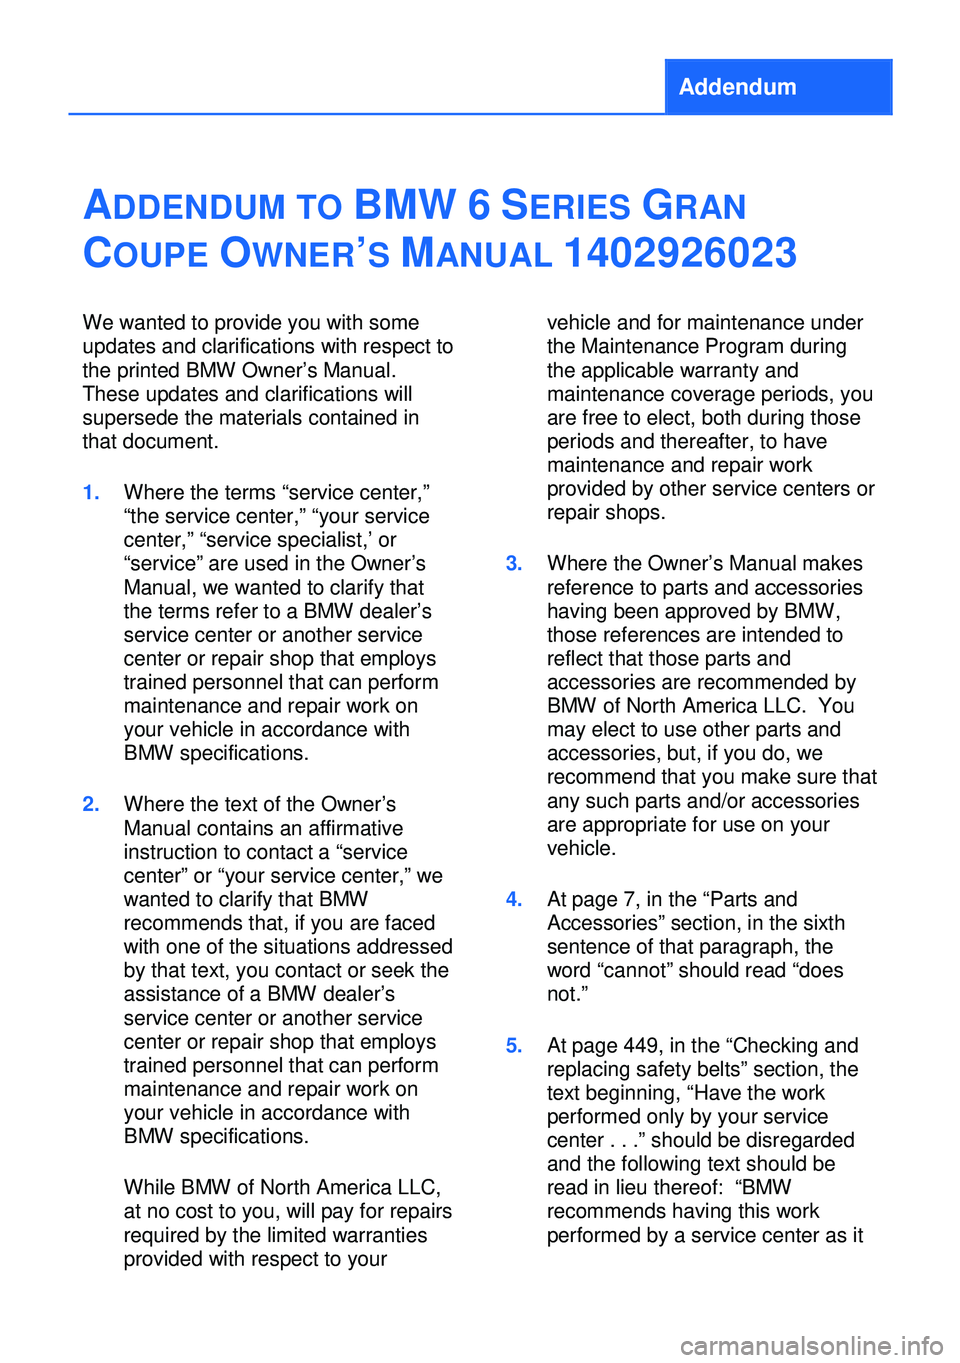 BMW 6 SERIES GRAN COUPE 2013 F06 Owners Manual Addendum
ADDENDUM TOBMW6SERIESGRAN
COUPEOWNER’SMANUAL1402926023
We wanted to provide you with some
updates and clarifications with respect to
the printed BMW Owner’s Manual.
These updates and clar